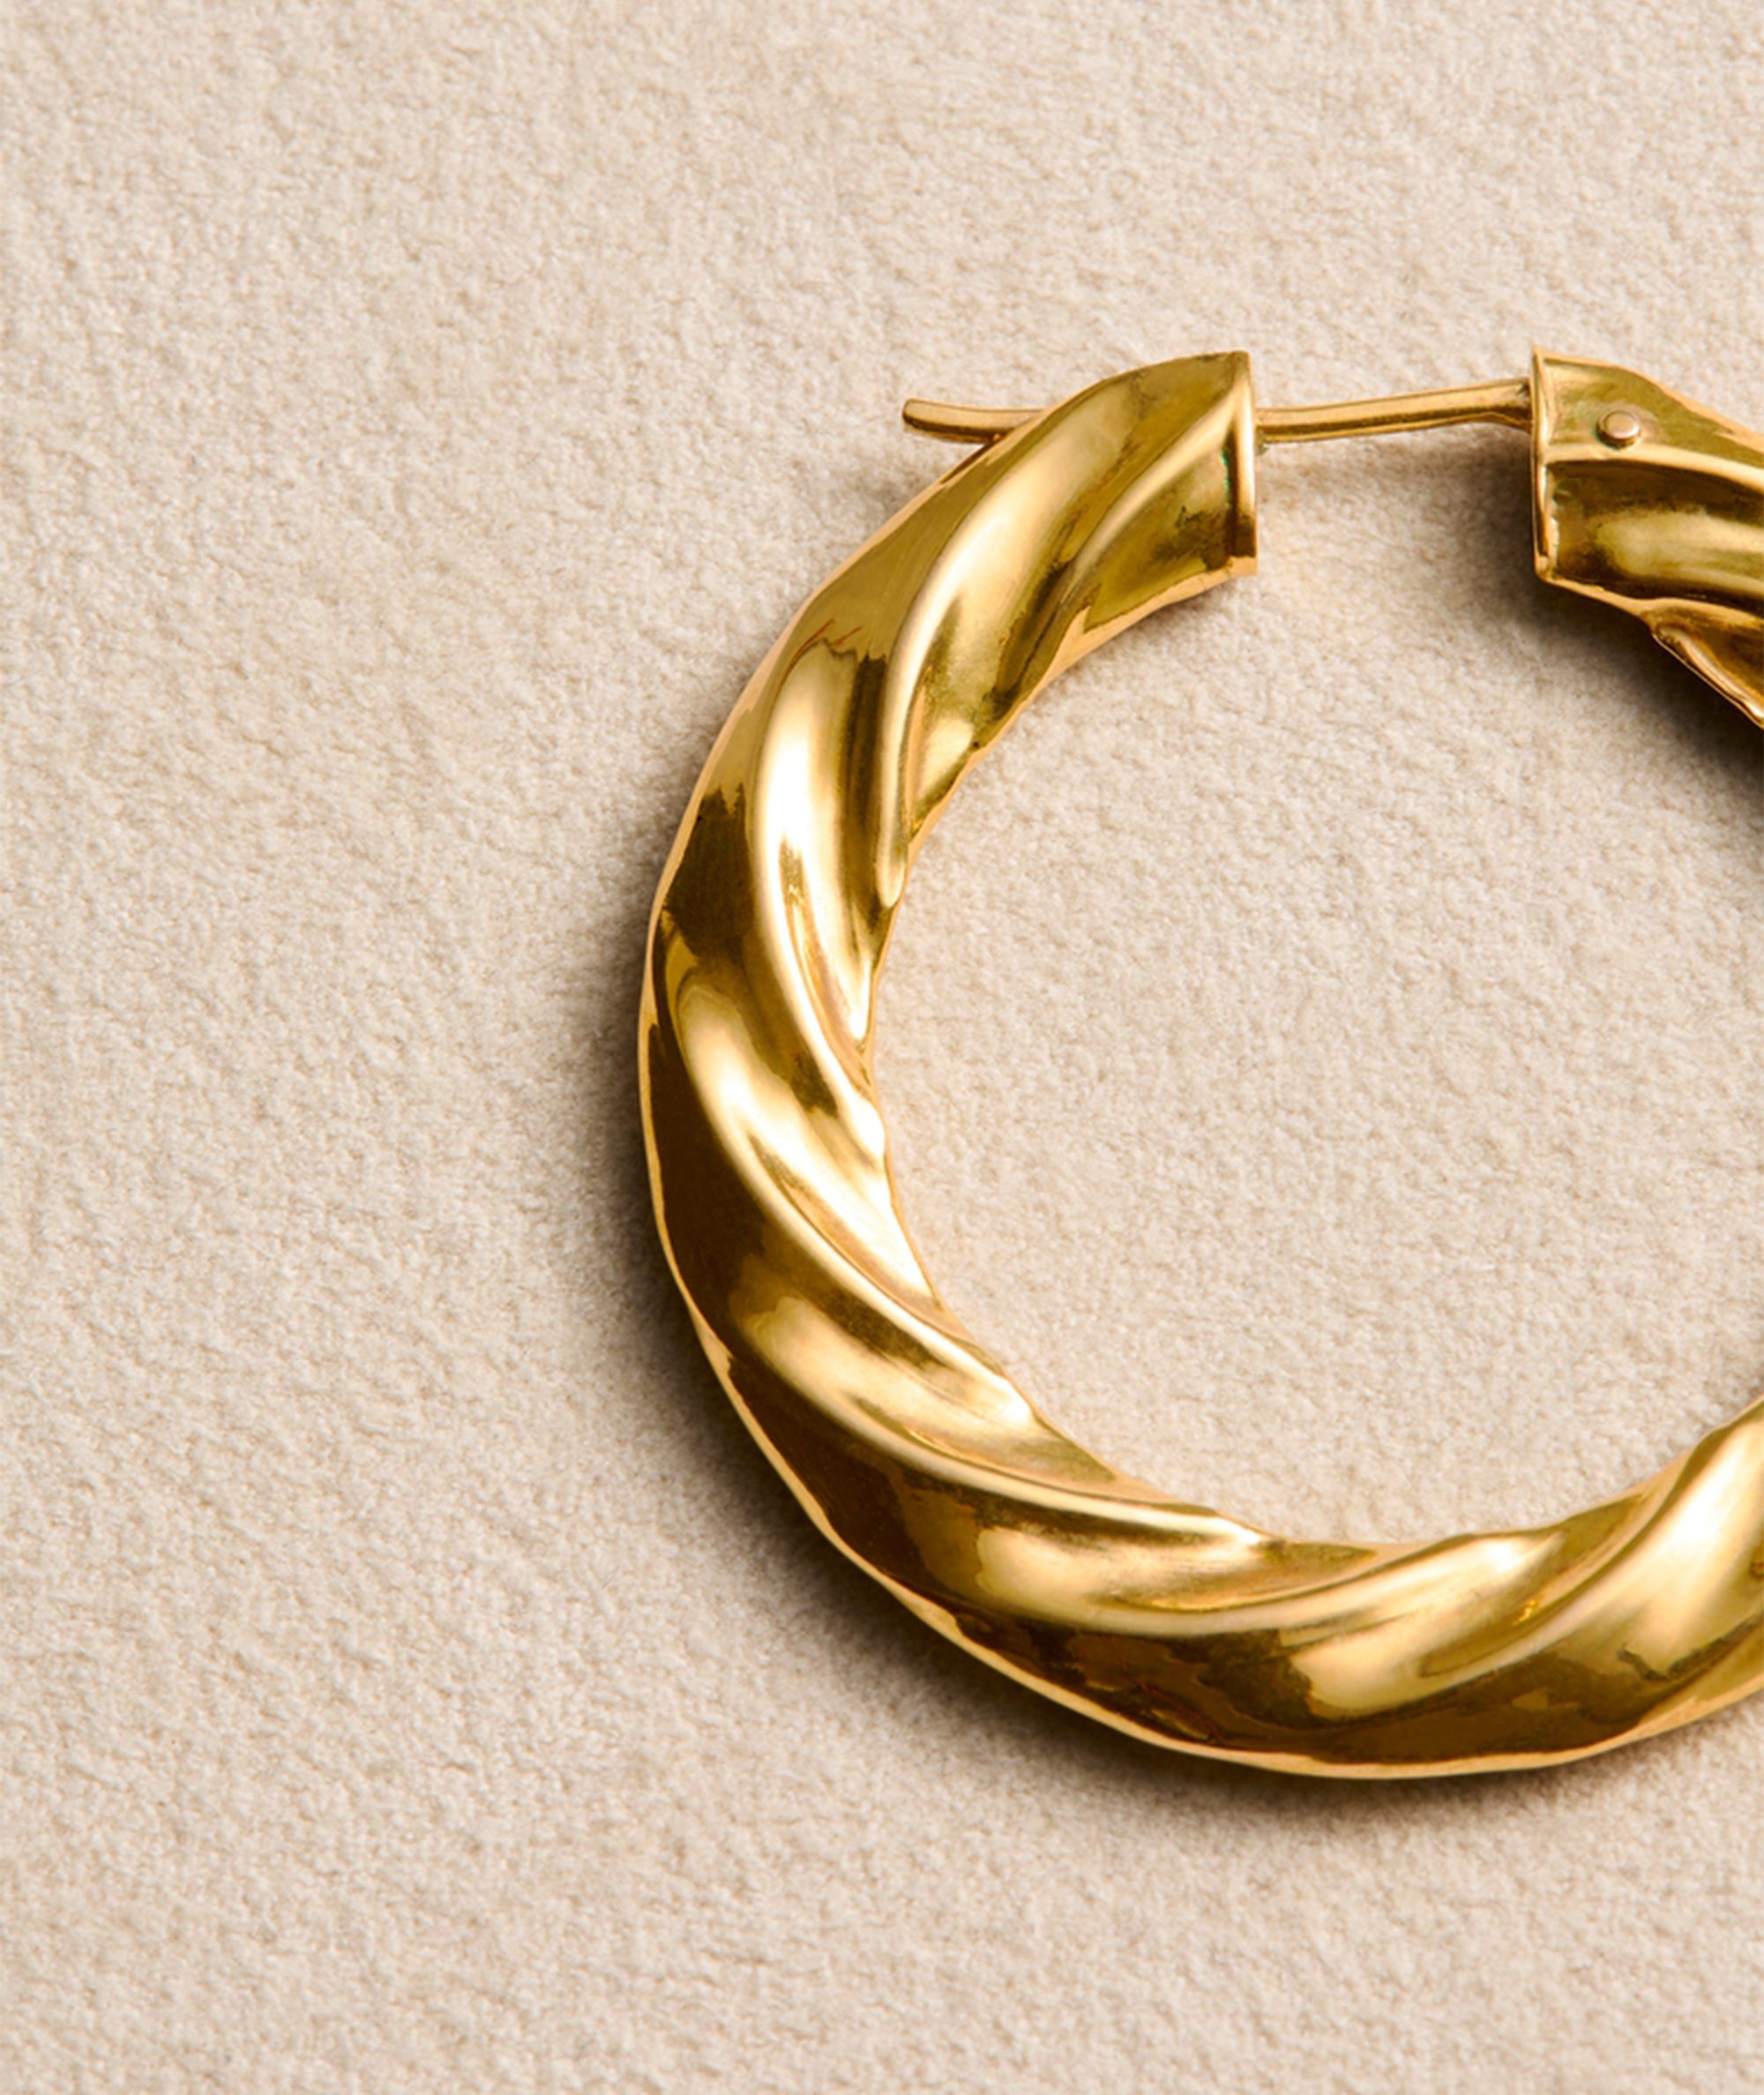 Vintage hoop earrings in yellow gold. Exclusively sourced for EREDE Curated.